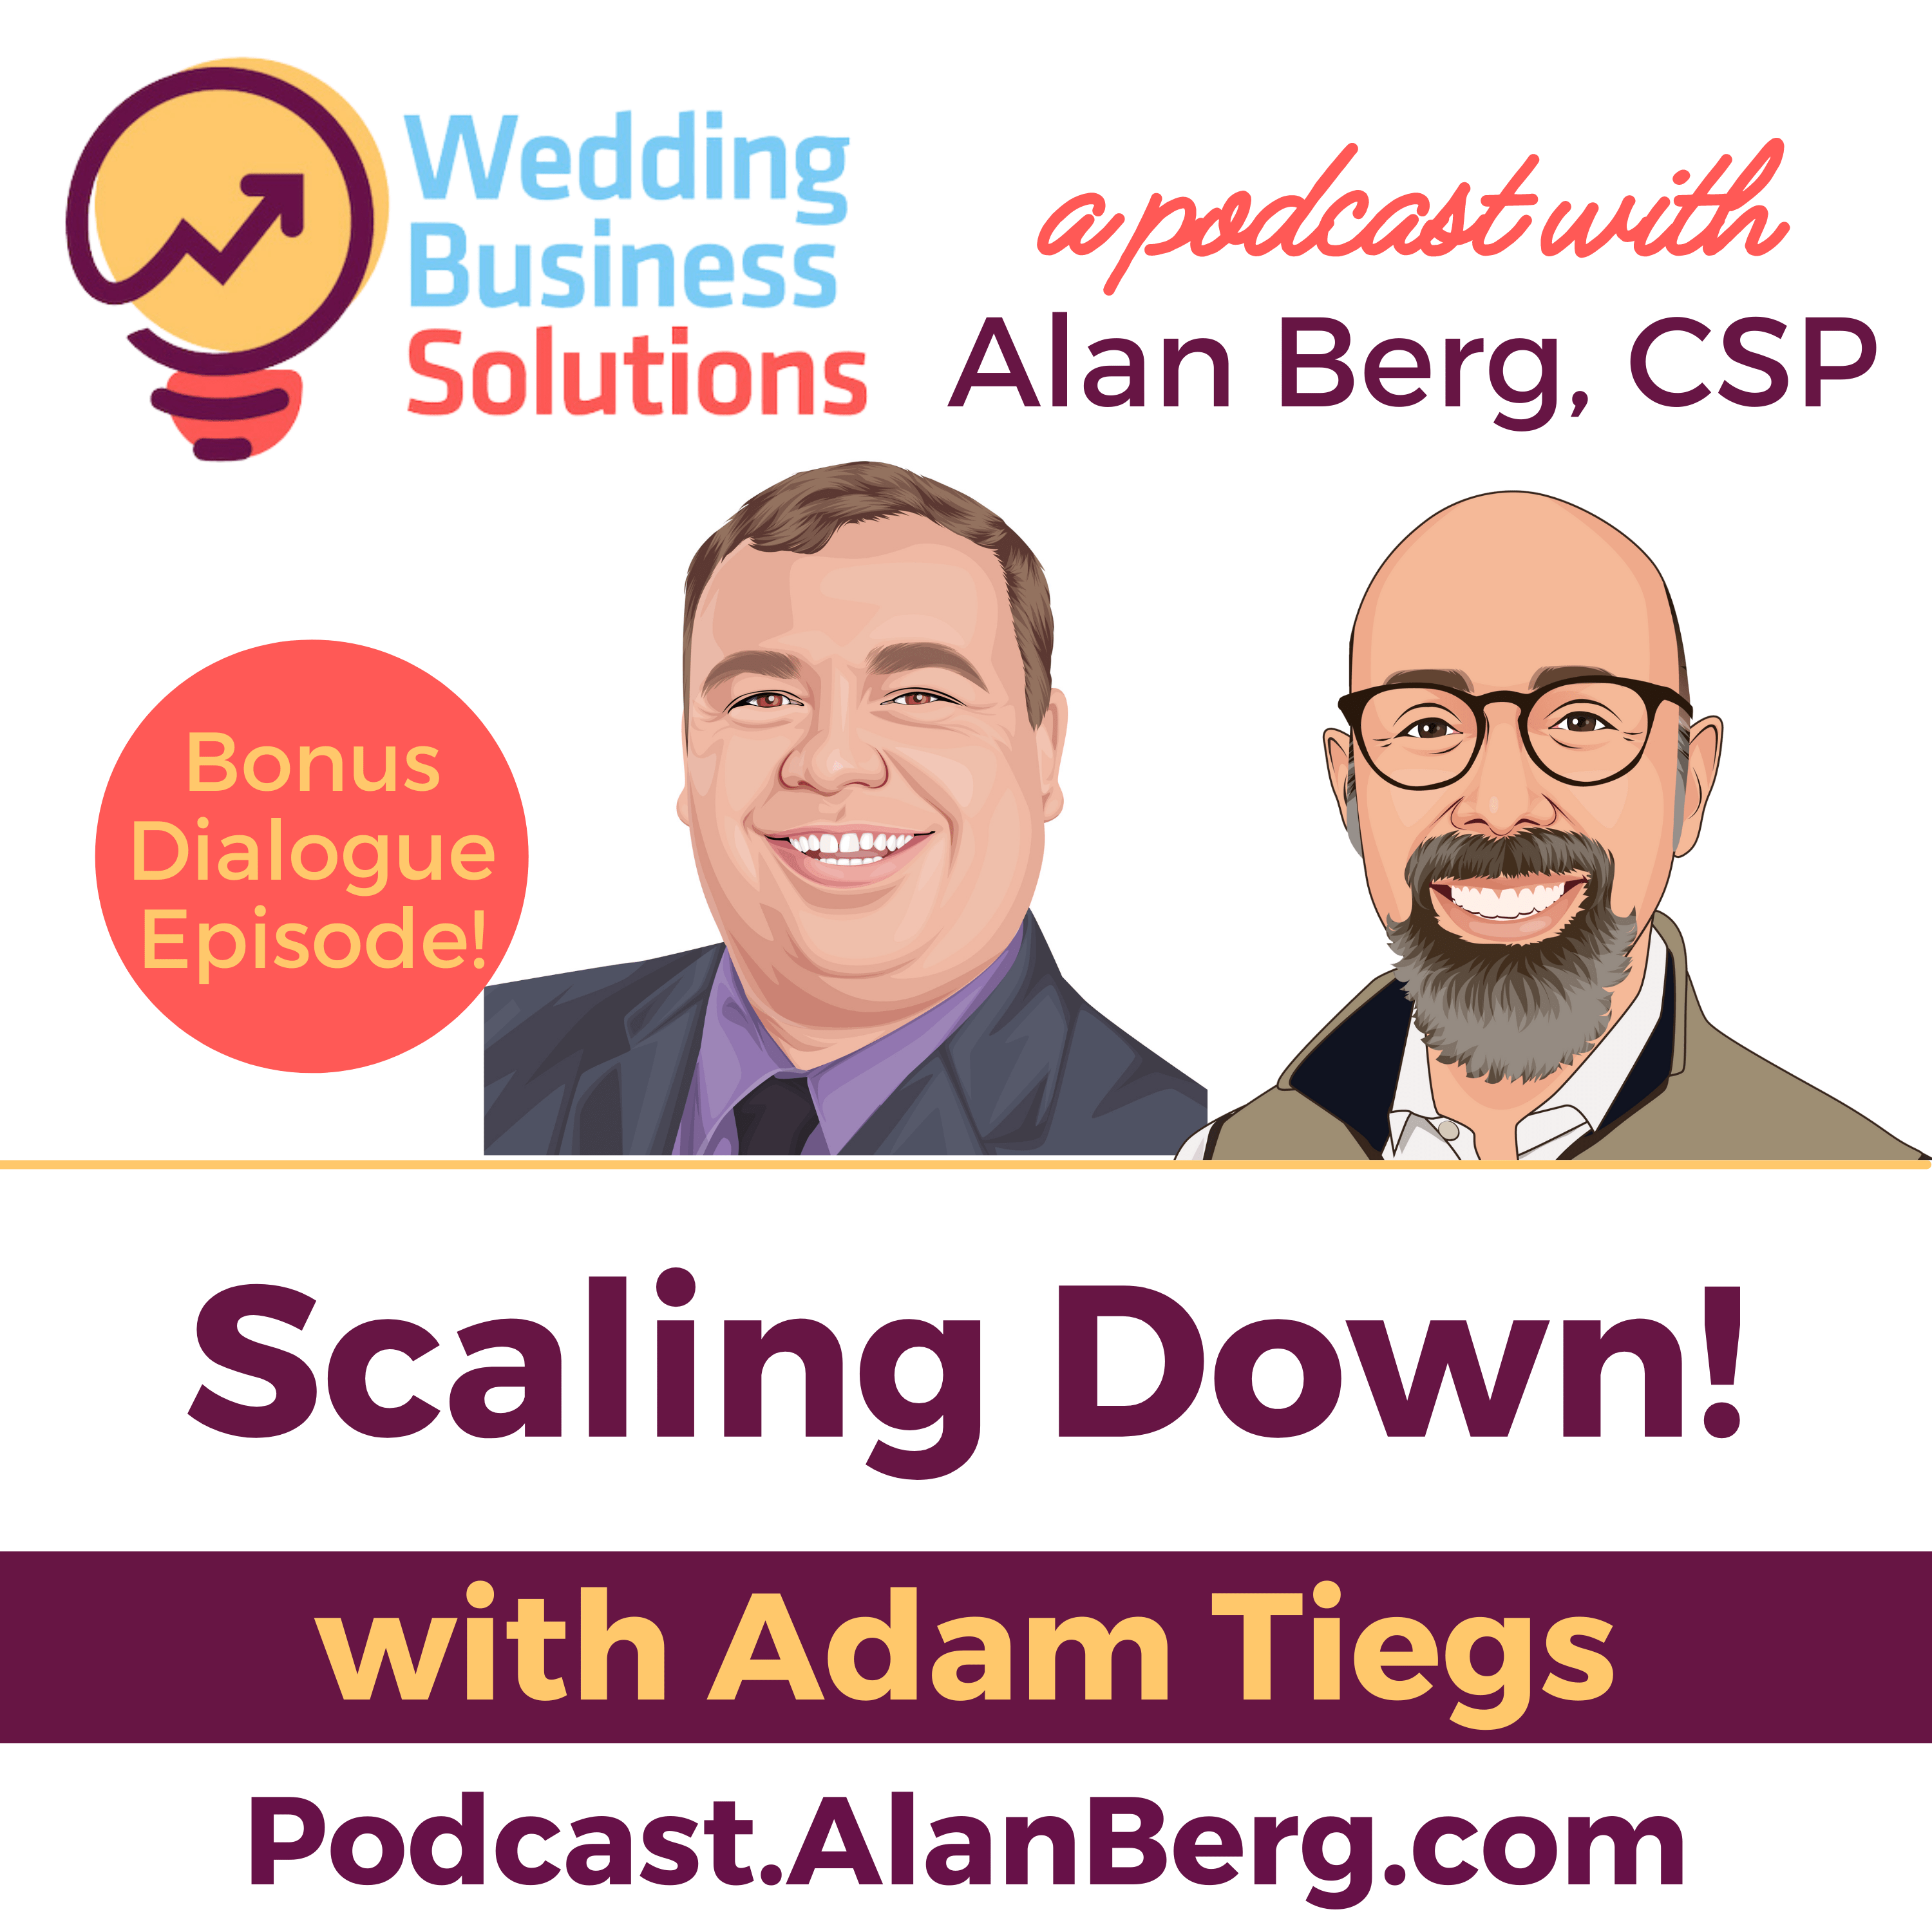 Adam Tiegs on Scaling Down - Wedding Business Solutions Podcast with Alan Berg CSP